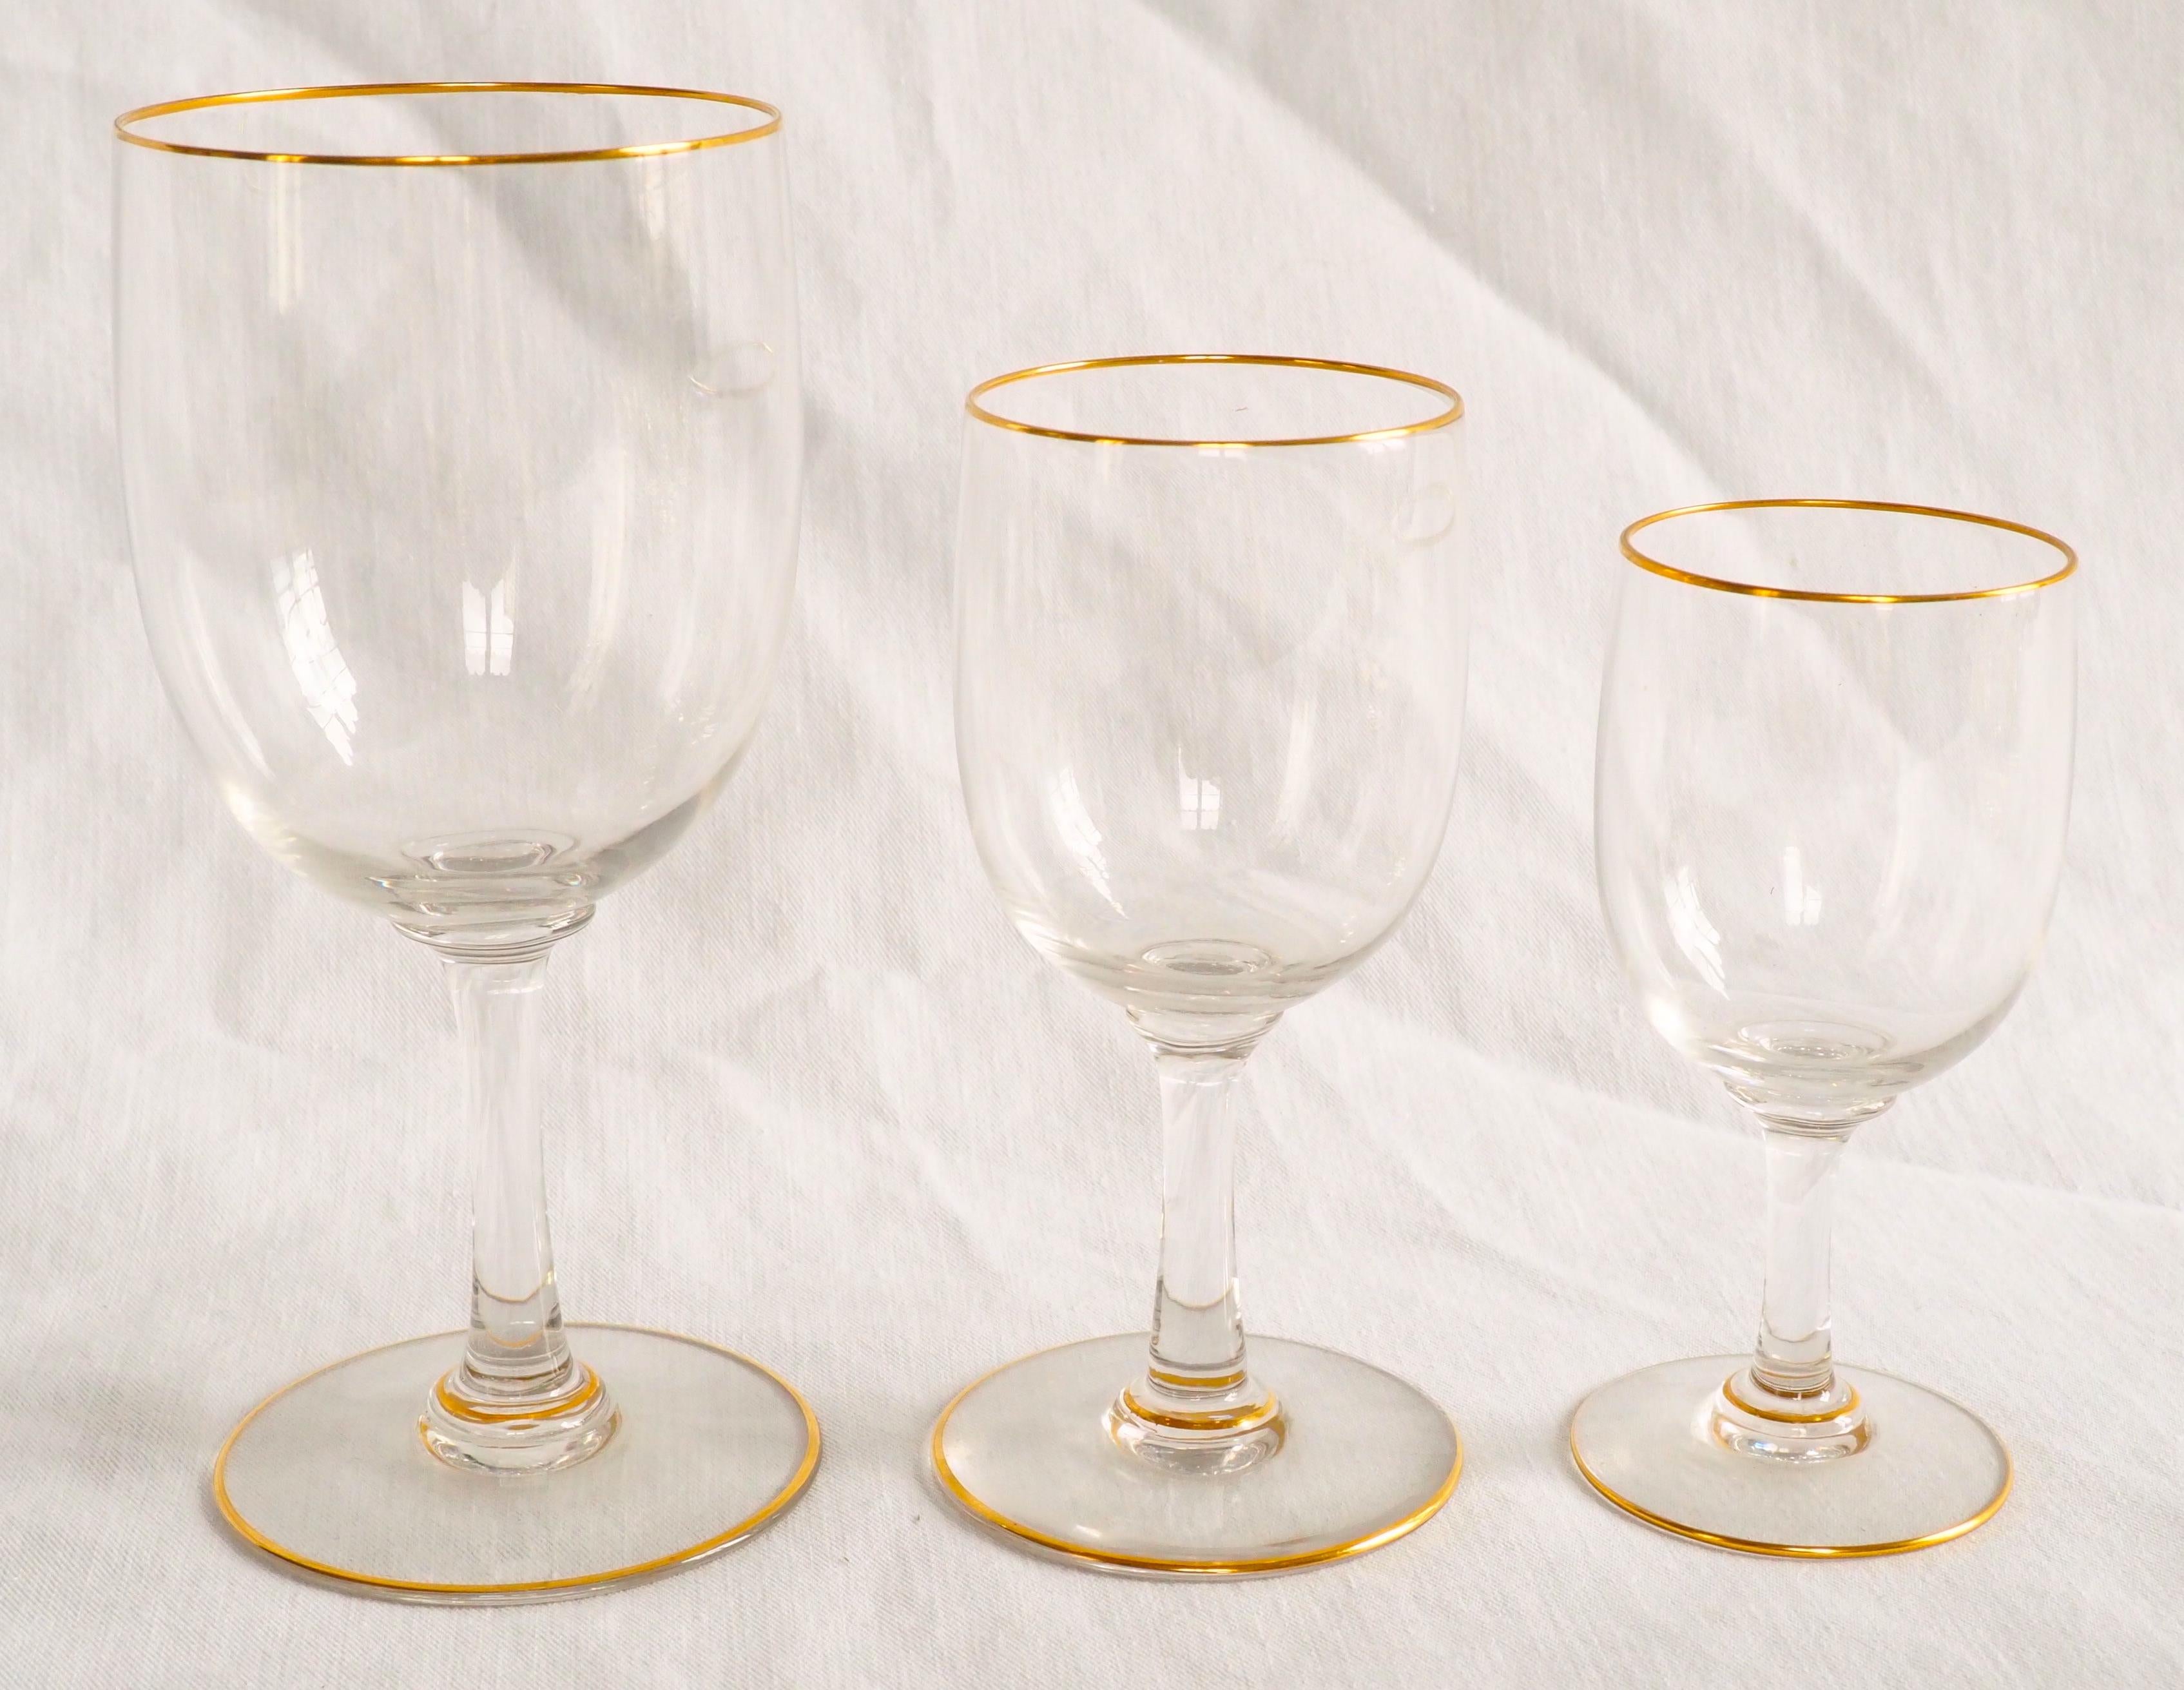 French Set of 3 Baccarat crystal glasses - France - Perfection model enhanced with gold